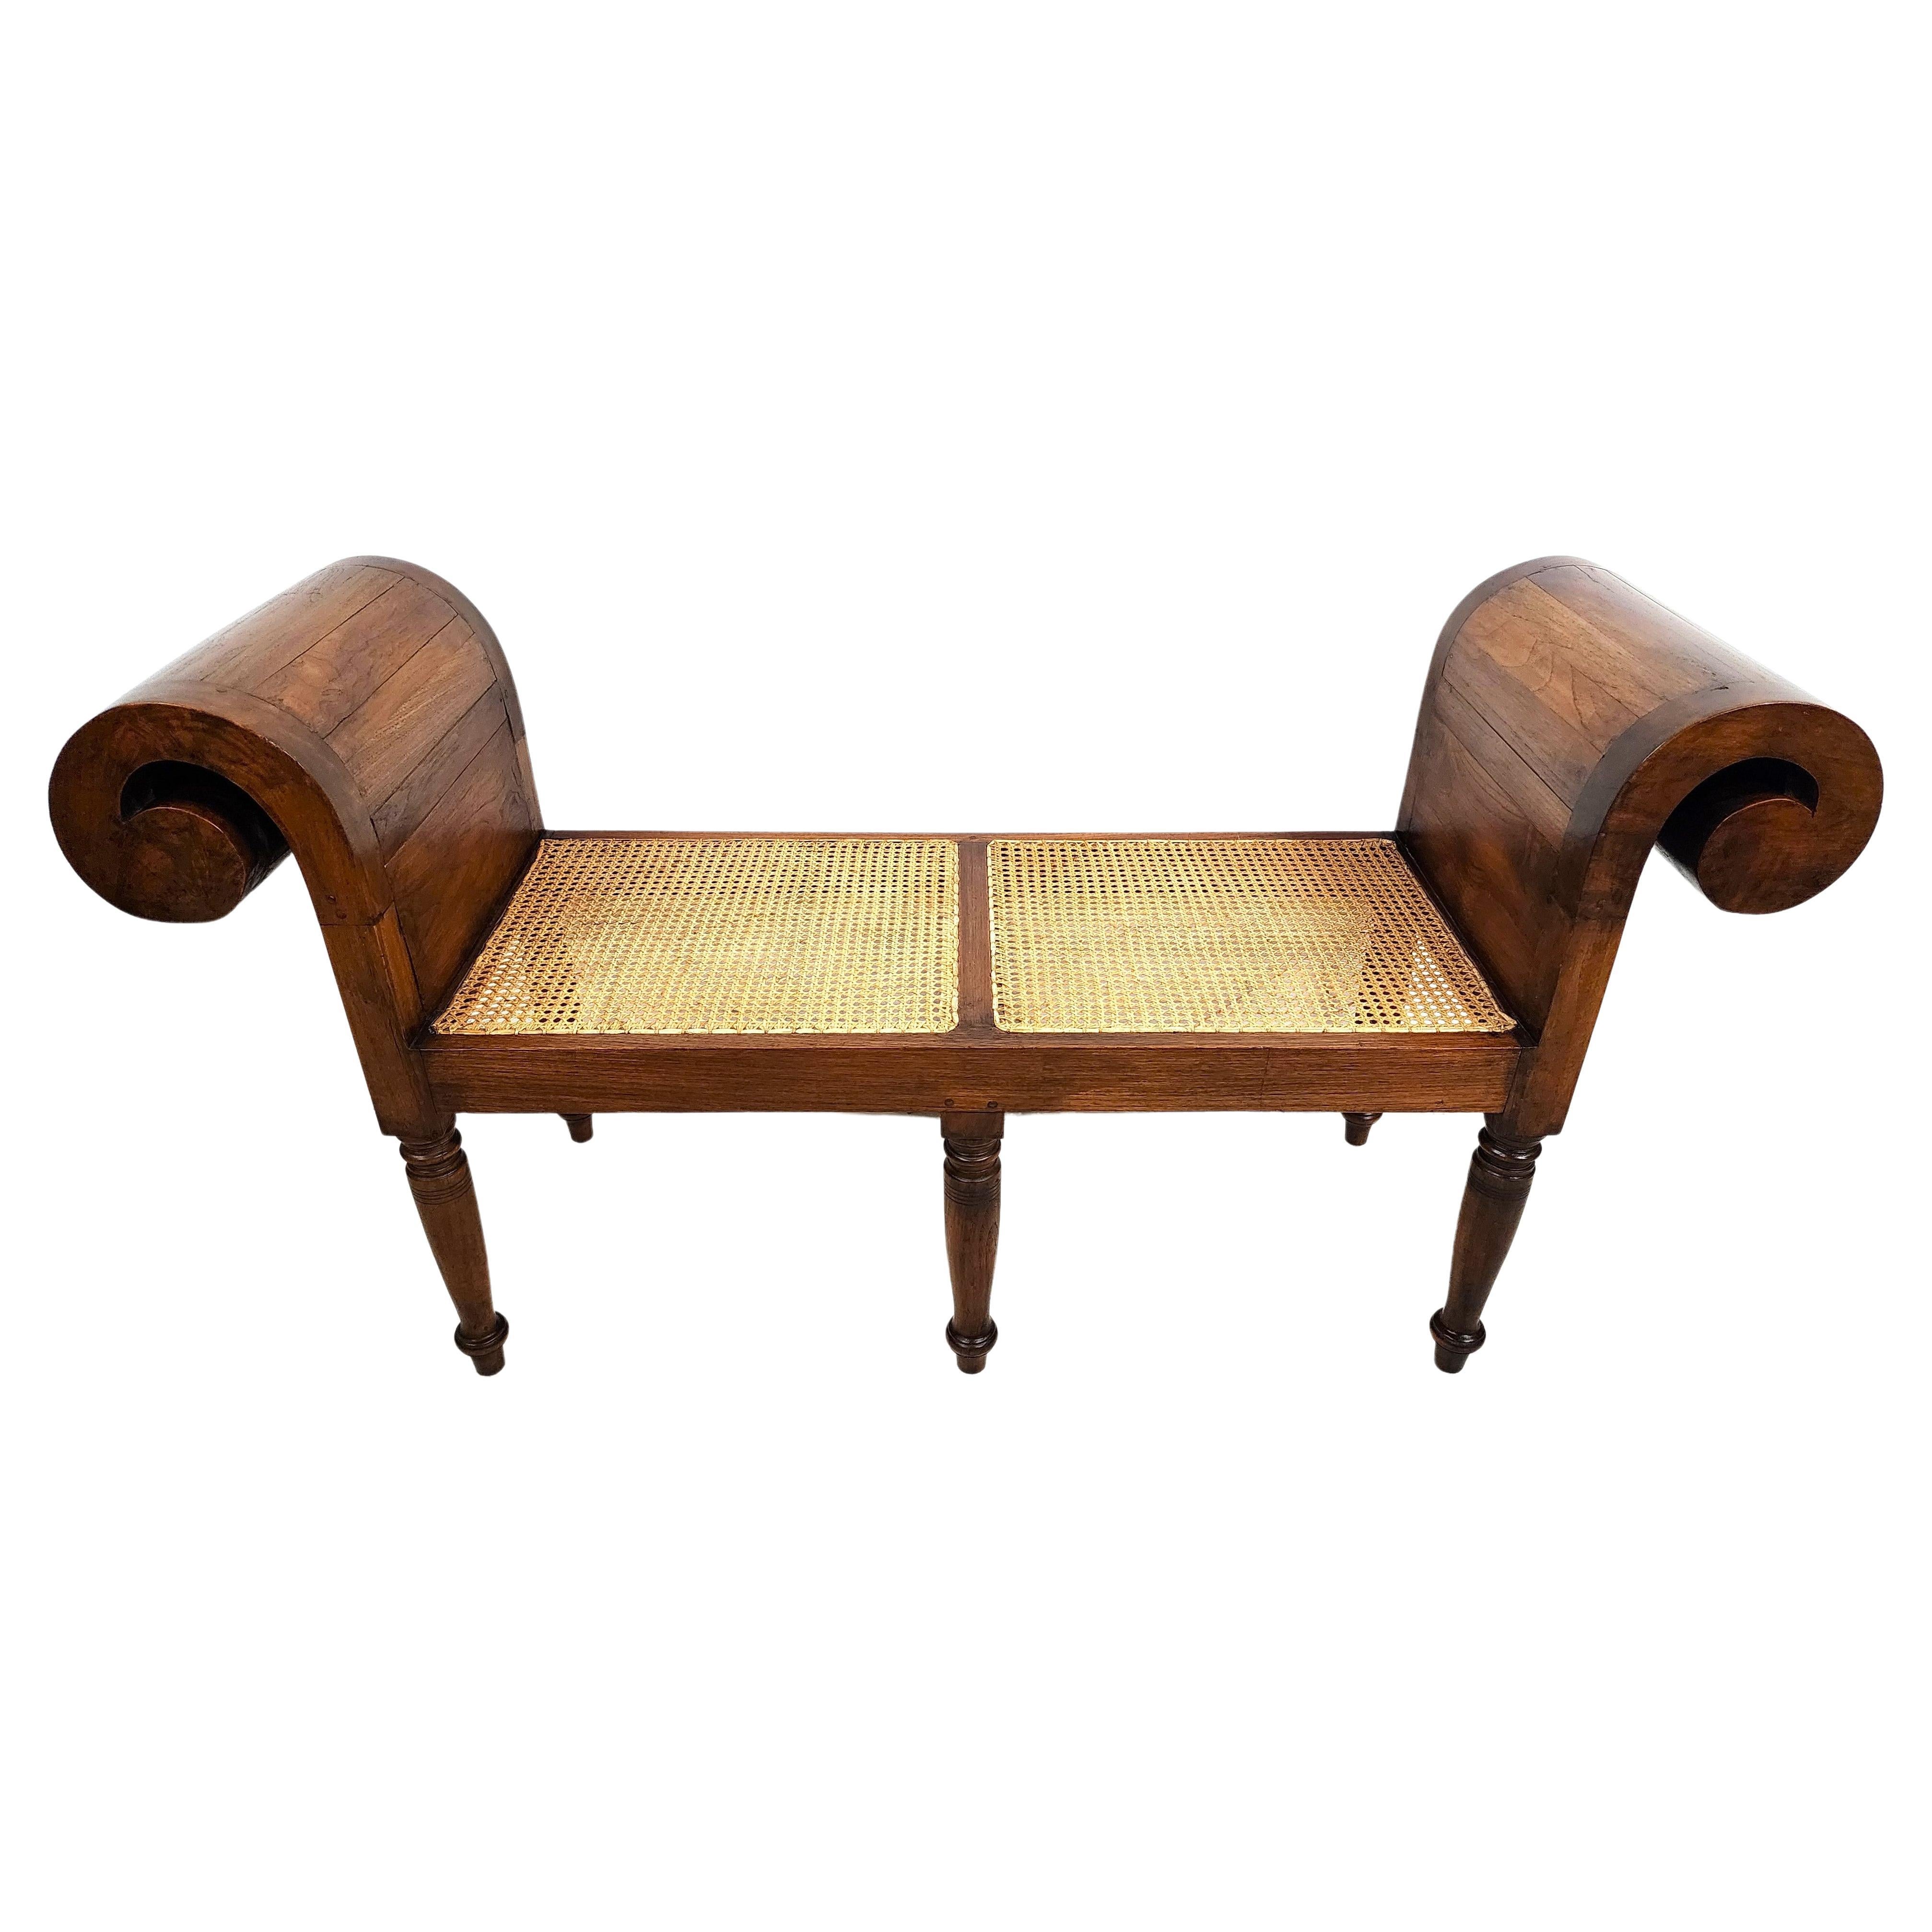 English Empire Bench Scroll Arm Caned Seat